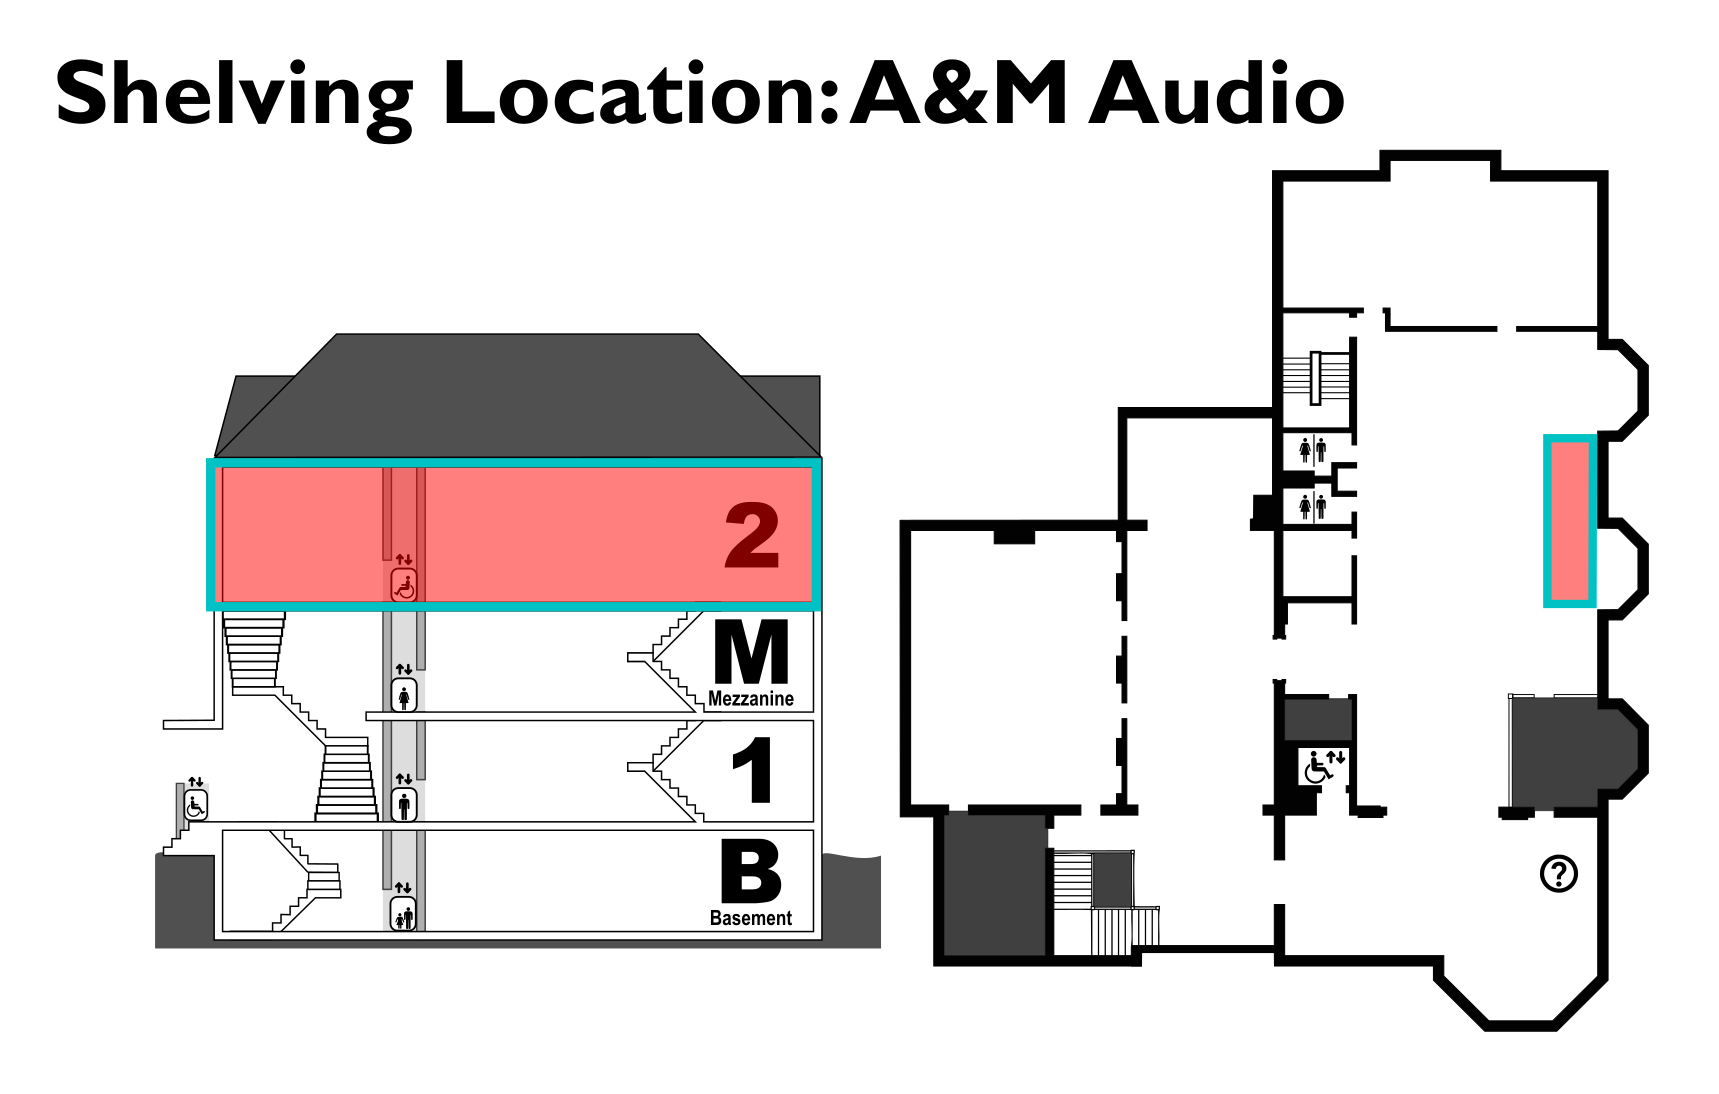 map showing the location of A&M audio